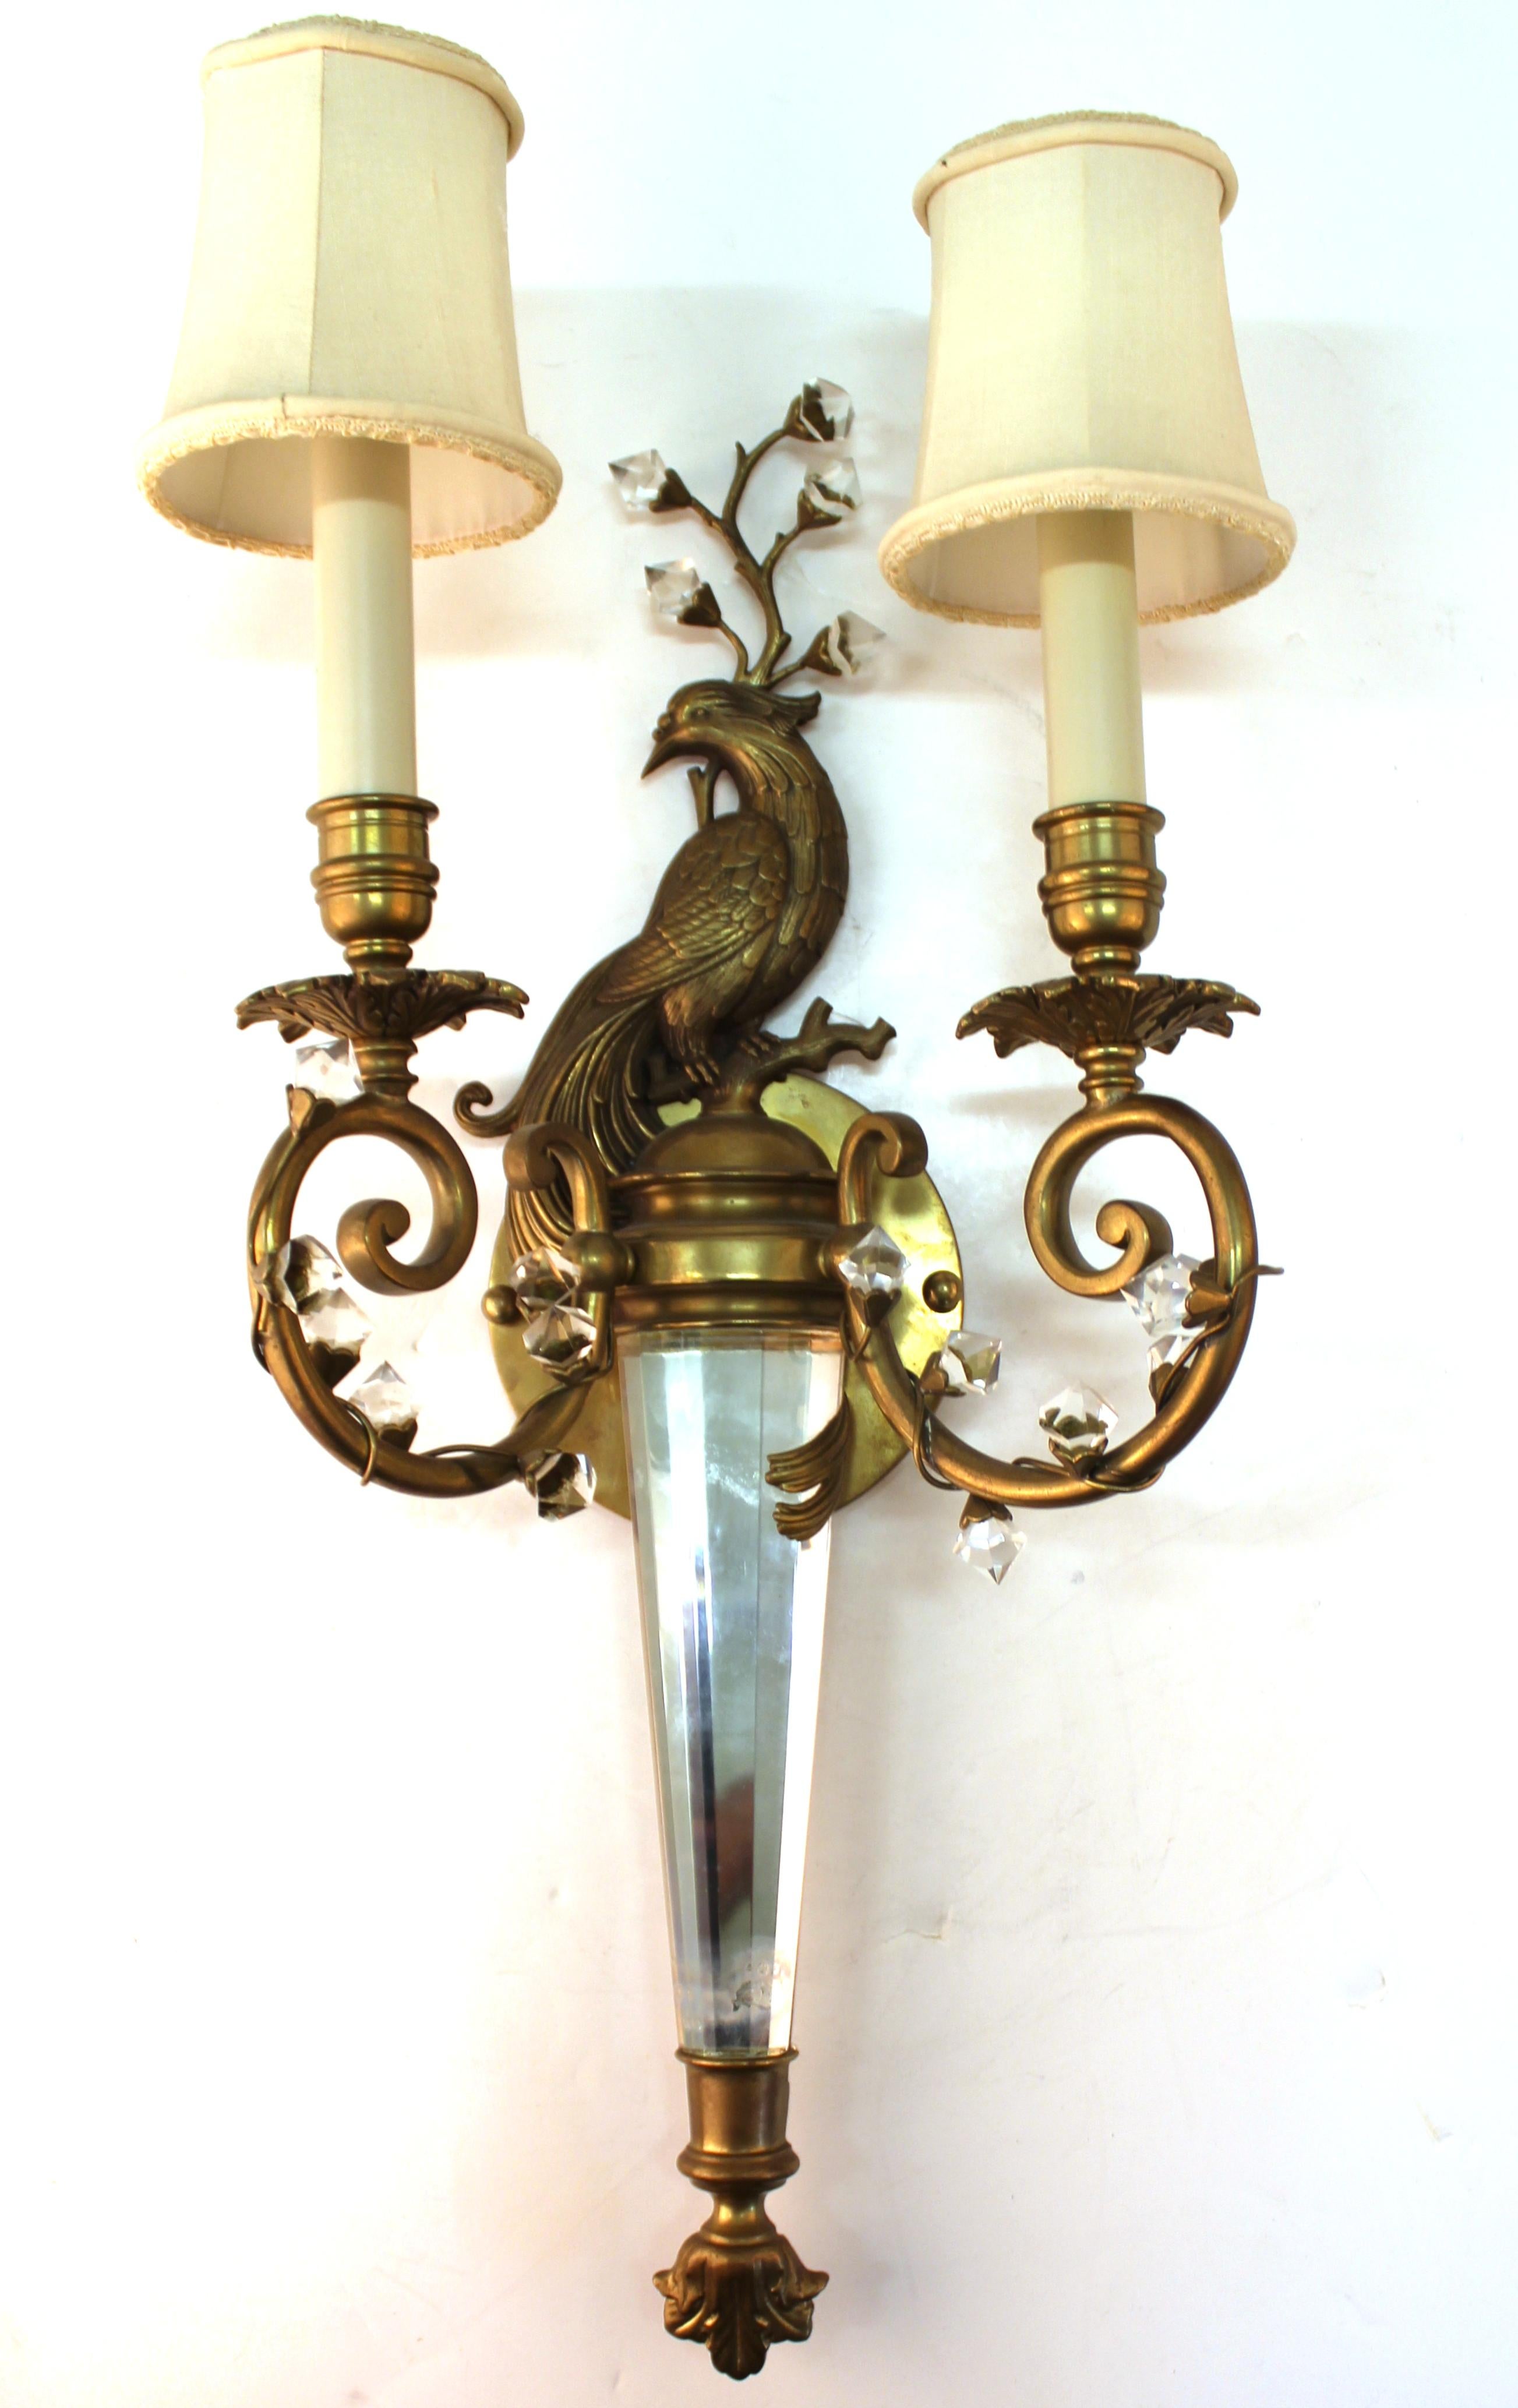 Hollywood Regency brass and crystal wall sconce in the style of Maison Baguès, with a bird sitting amidst crystal foliage wrapped around two arms holding up lights. One large piece of crystal used as a decorative stem. The piece is in great vintage